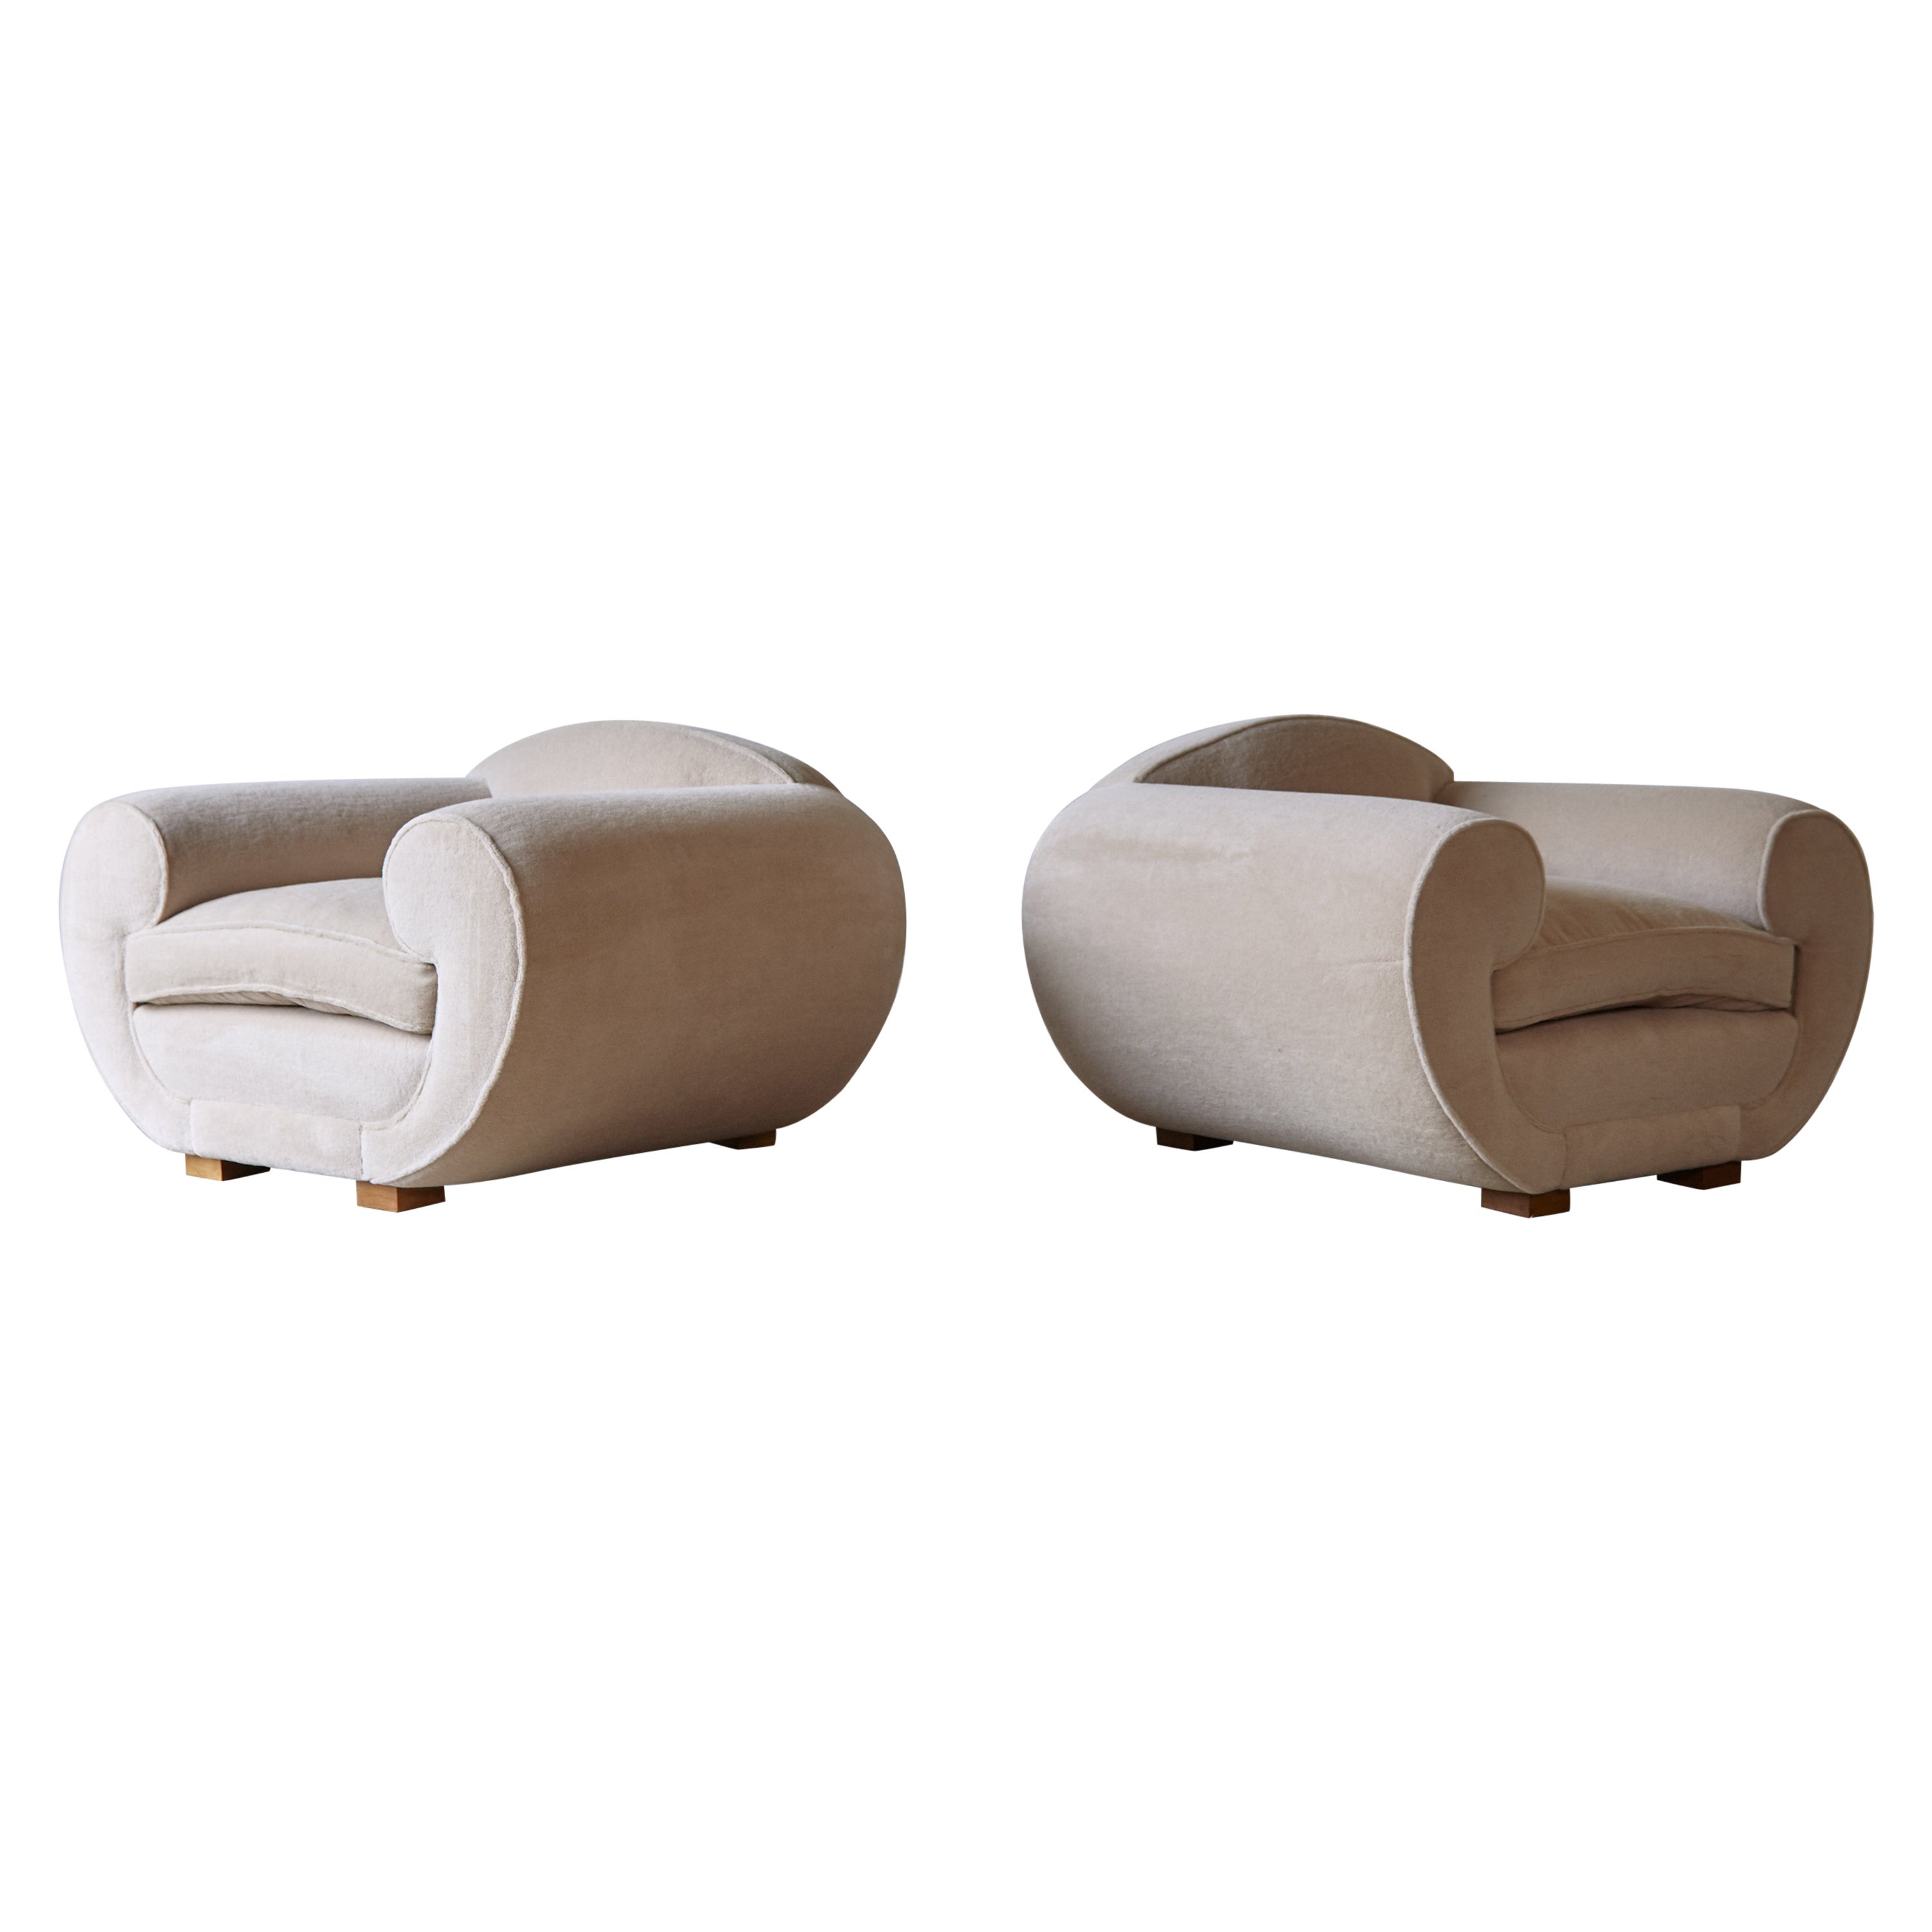 Pair of Art Deco Style Armchairs, Upholstered in Pure Alpaca